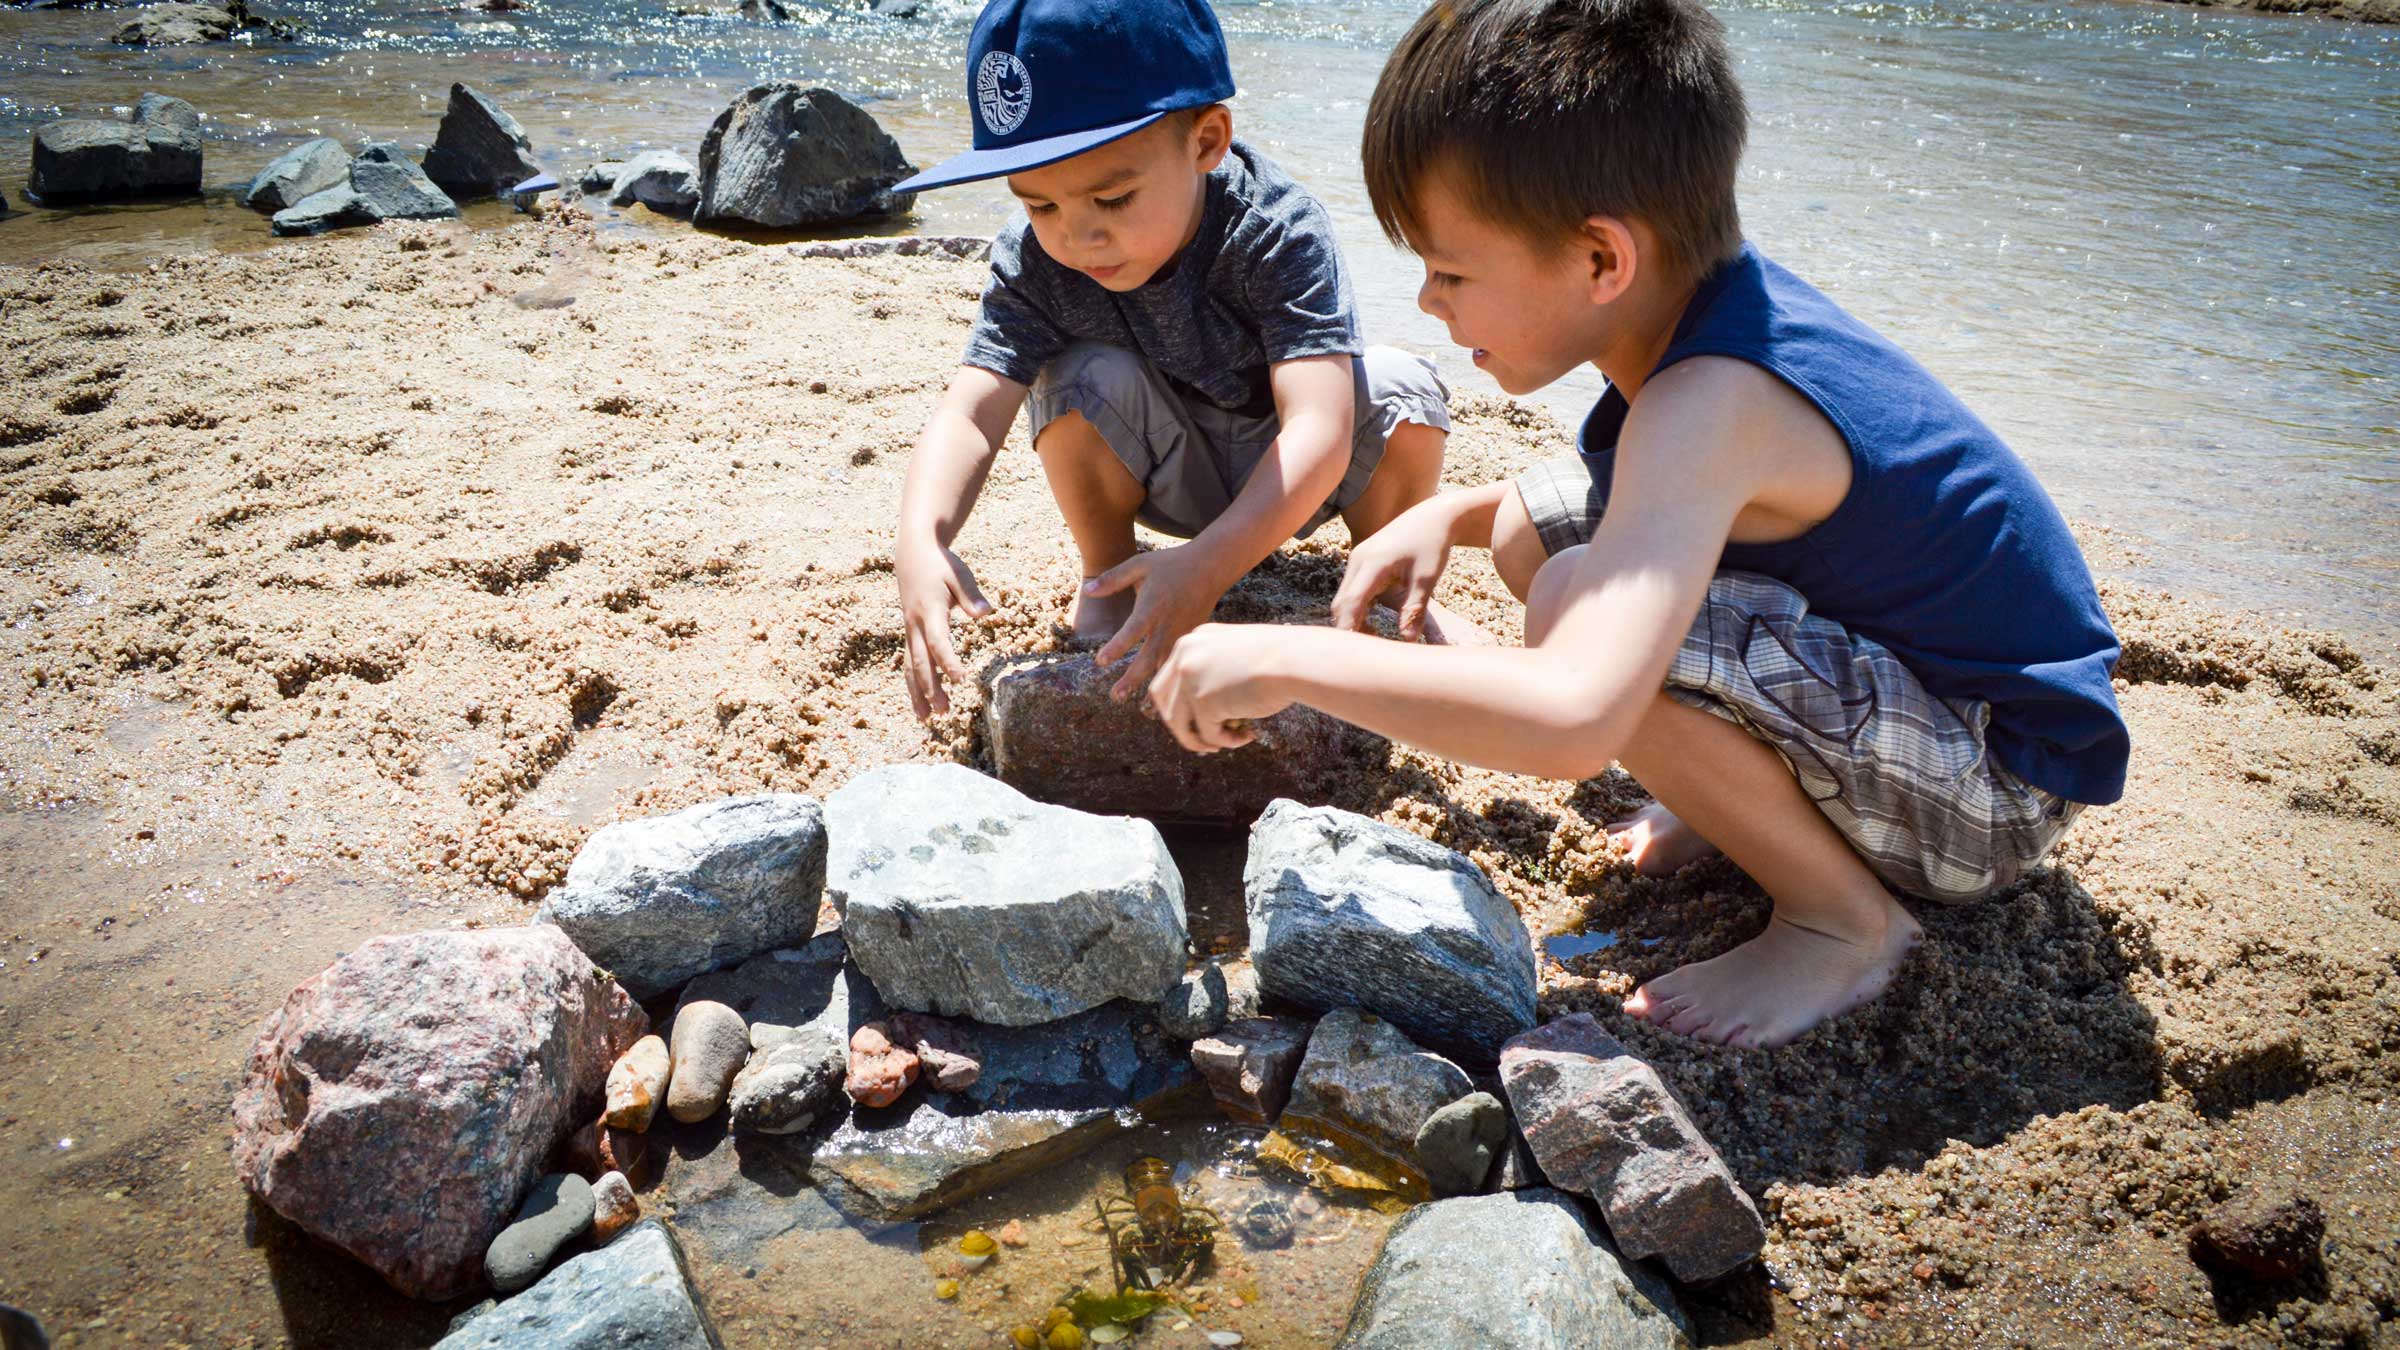 Children build a pool to house crawfish along the South Platte River at Art on the River